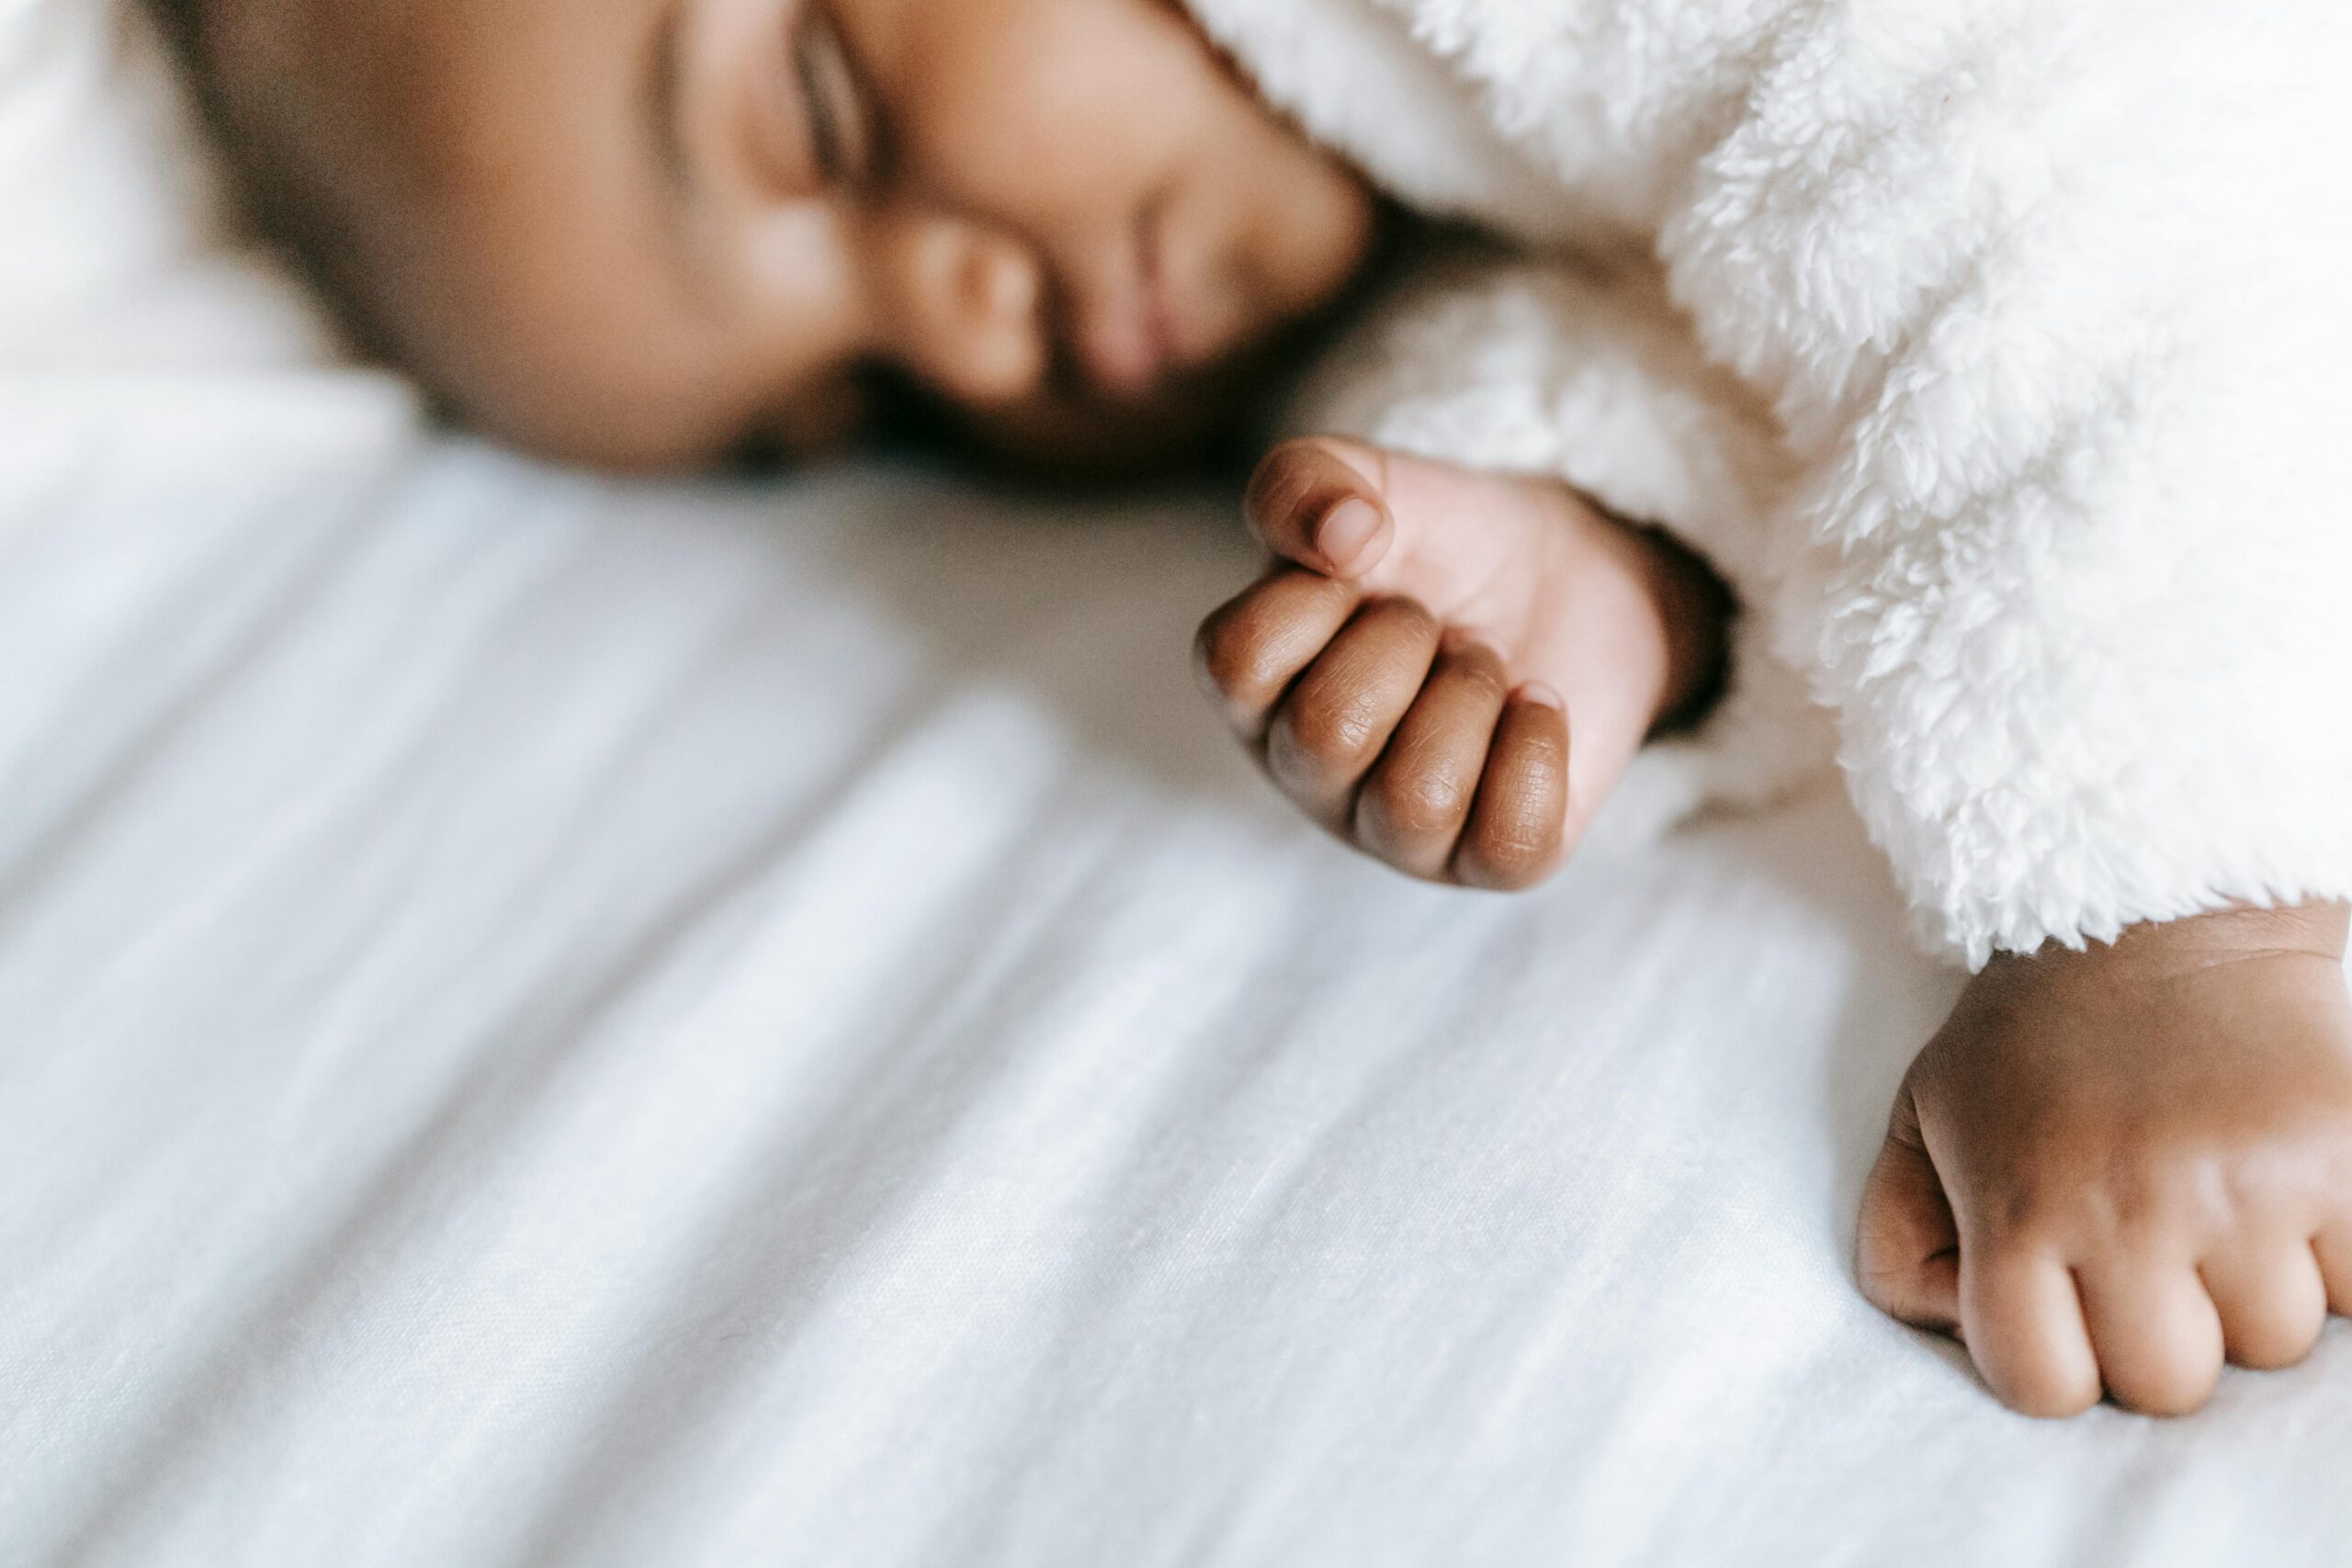 Why Overnight Nanny Services Are Essential for New Parents: A Closer Look at the Benefits